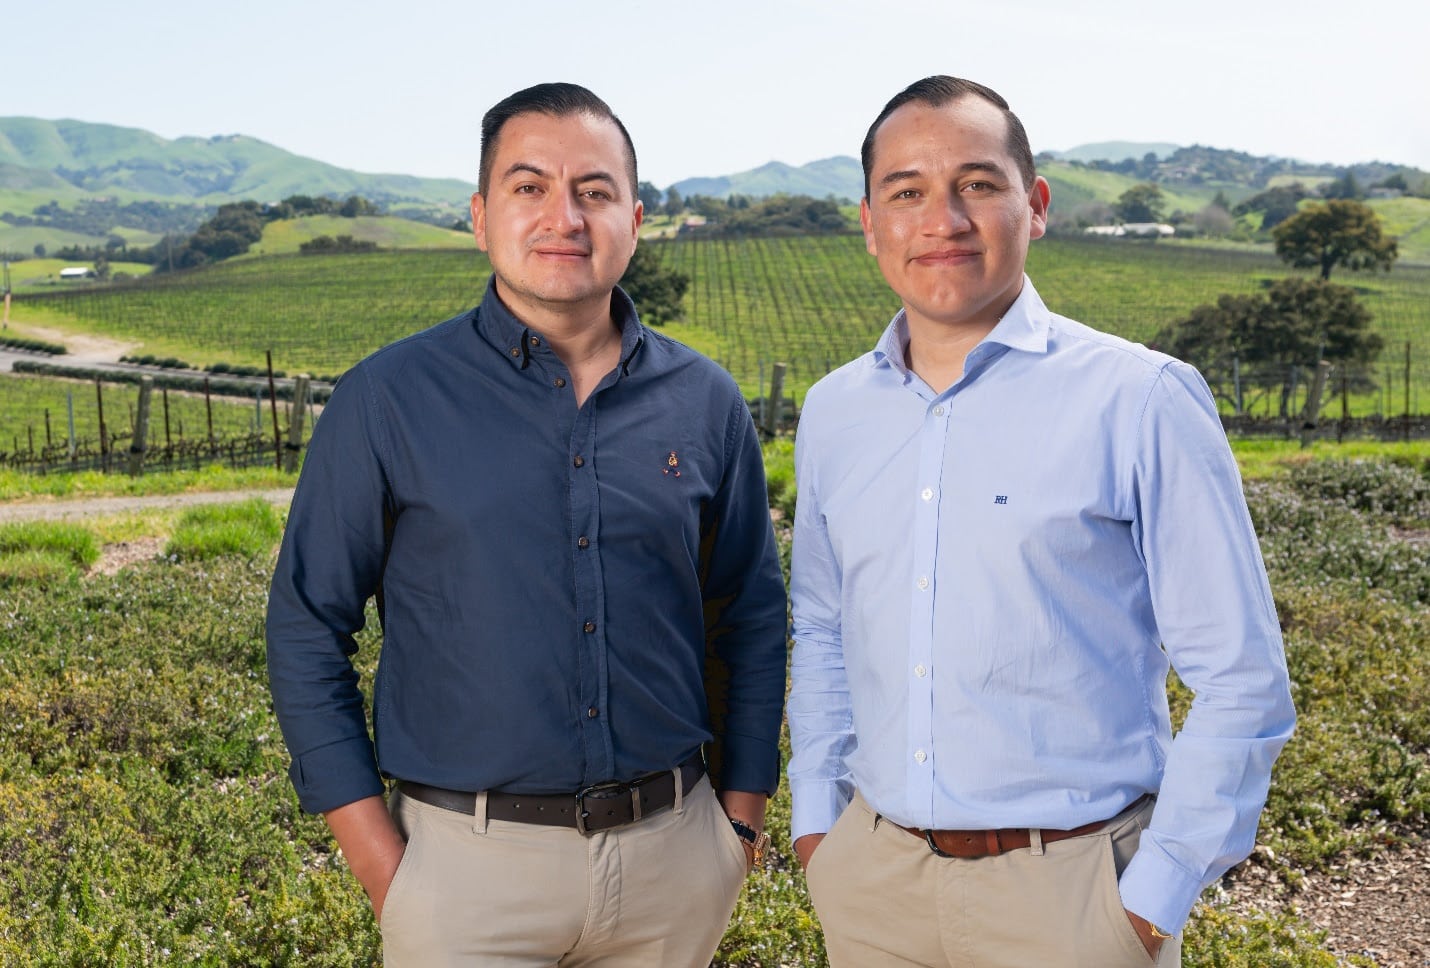 Walter Cadenas (left) and Moises Cadenas (right) were recently named general managers for Dümmen Orange farms in Central America.